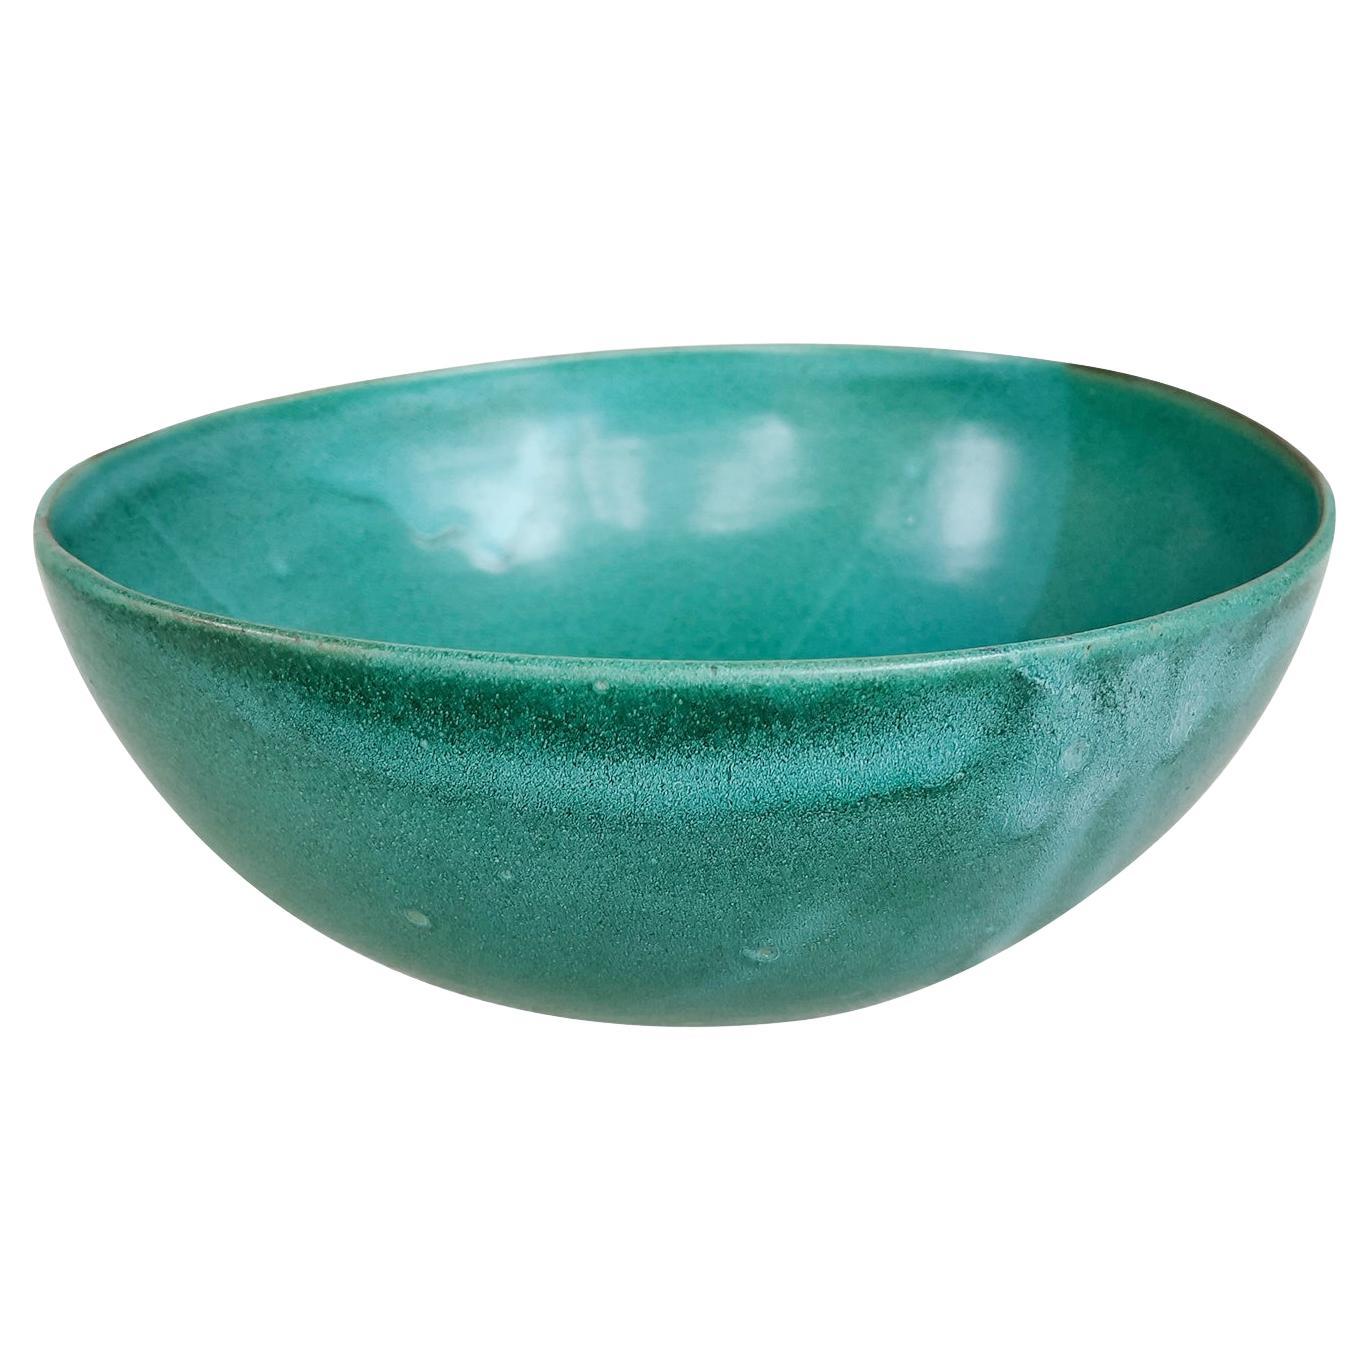 Thom Lussier Ceramic Bowl #29, from the Oxidized Copper Collection